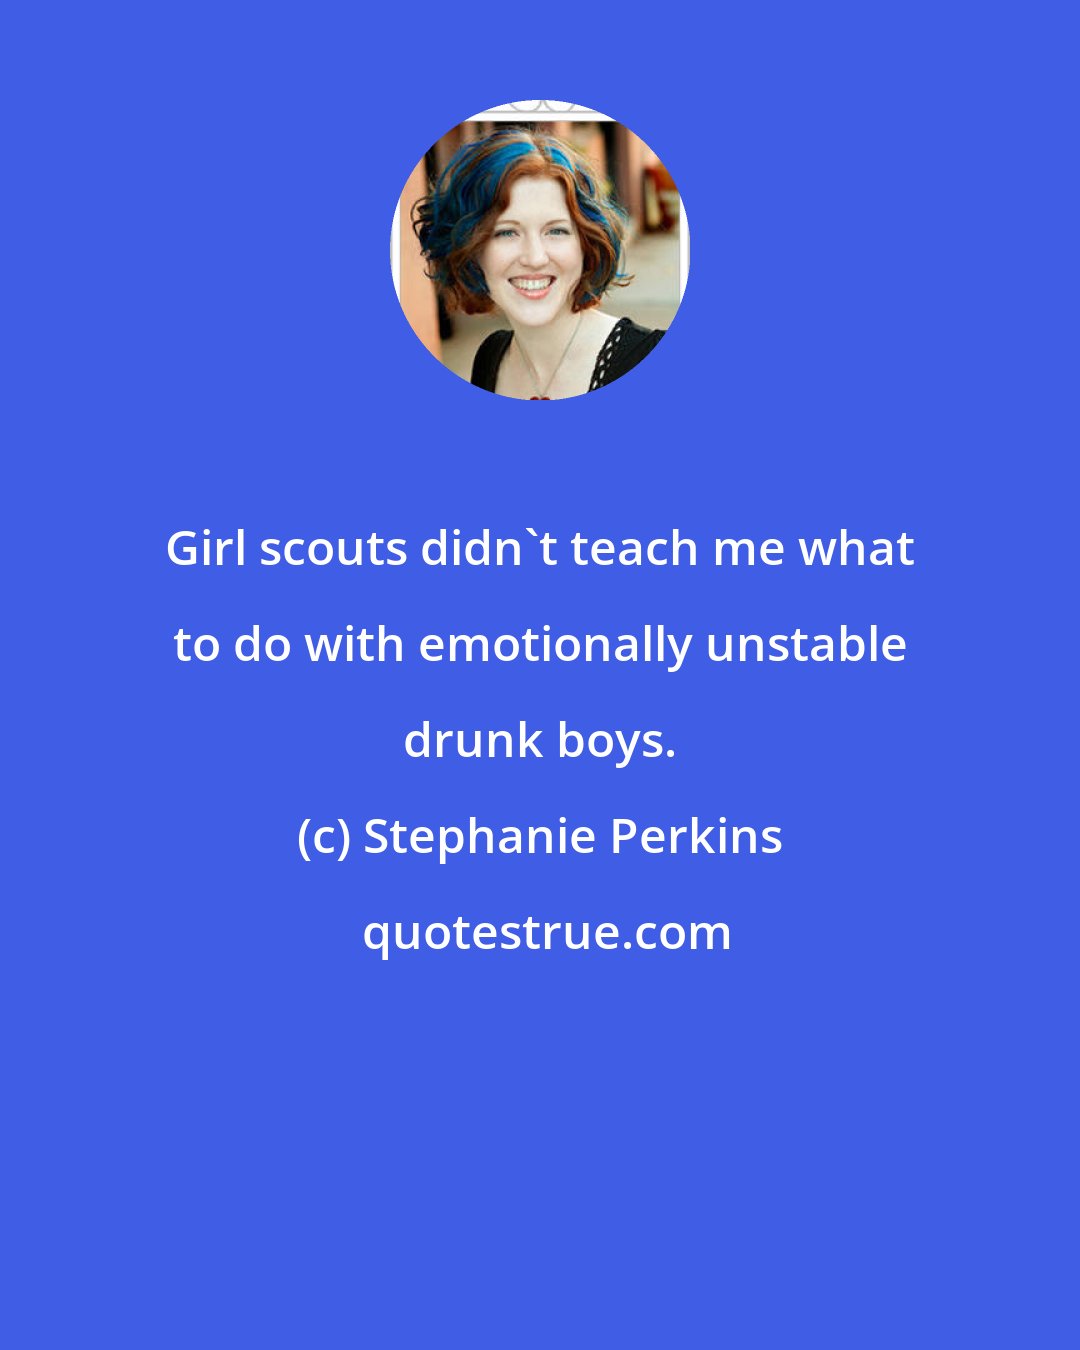 Stephanie Perkins: Girl scouts didn't teach me what to do with emotionally unstable drunk boys.